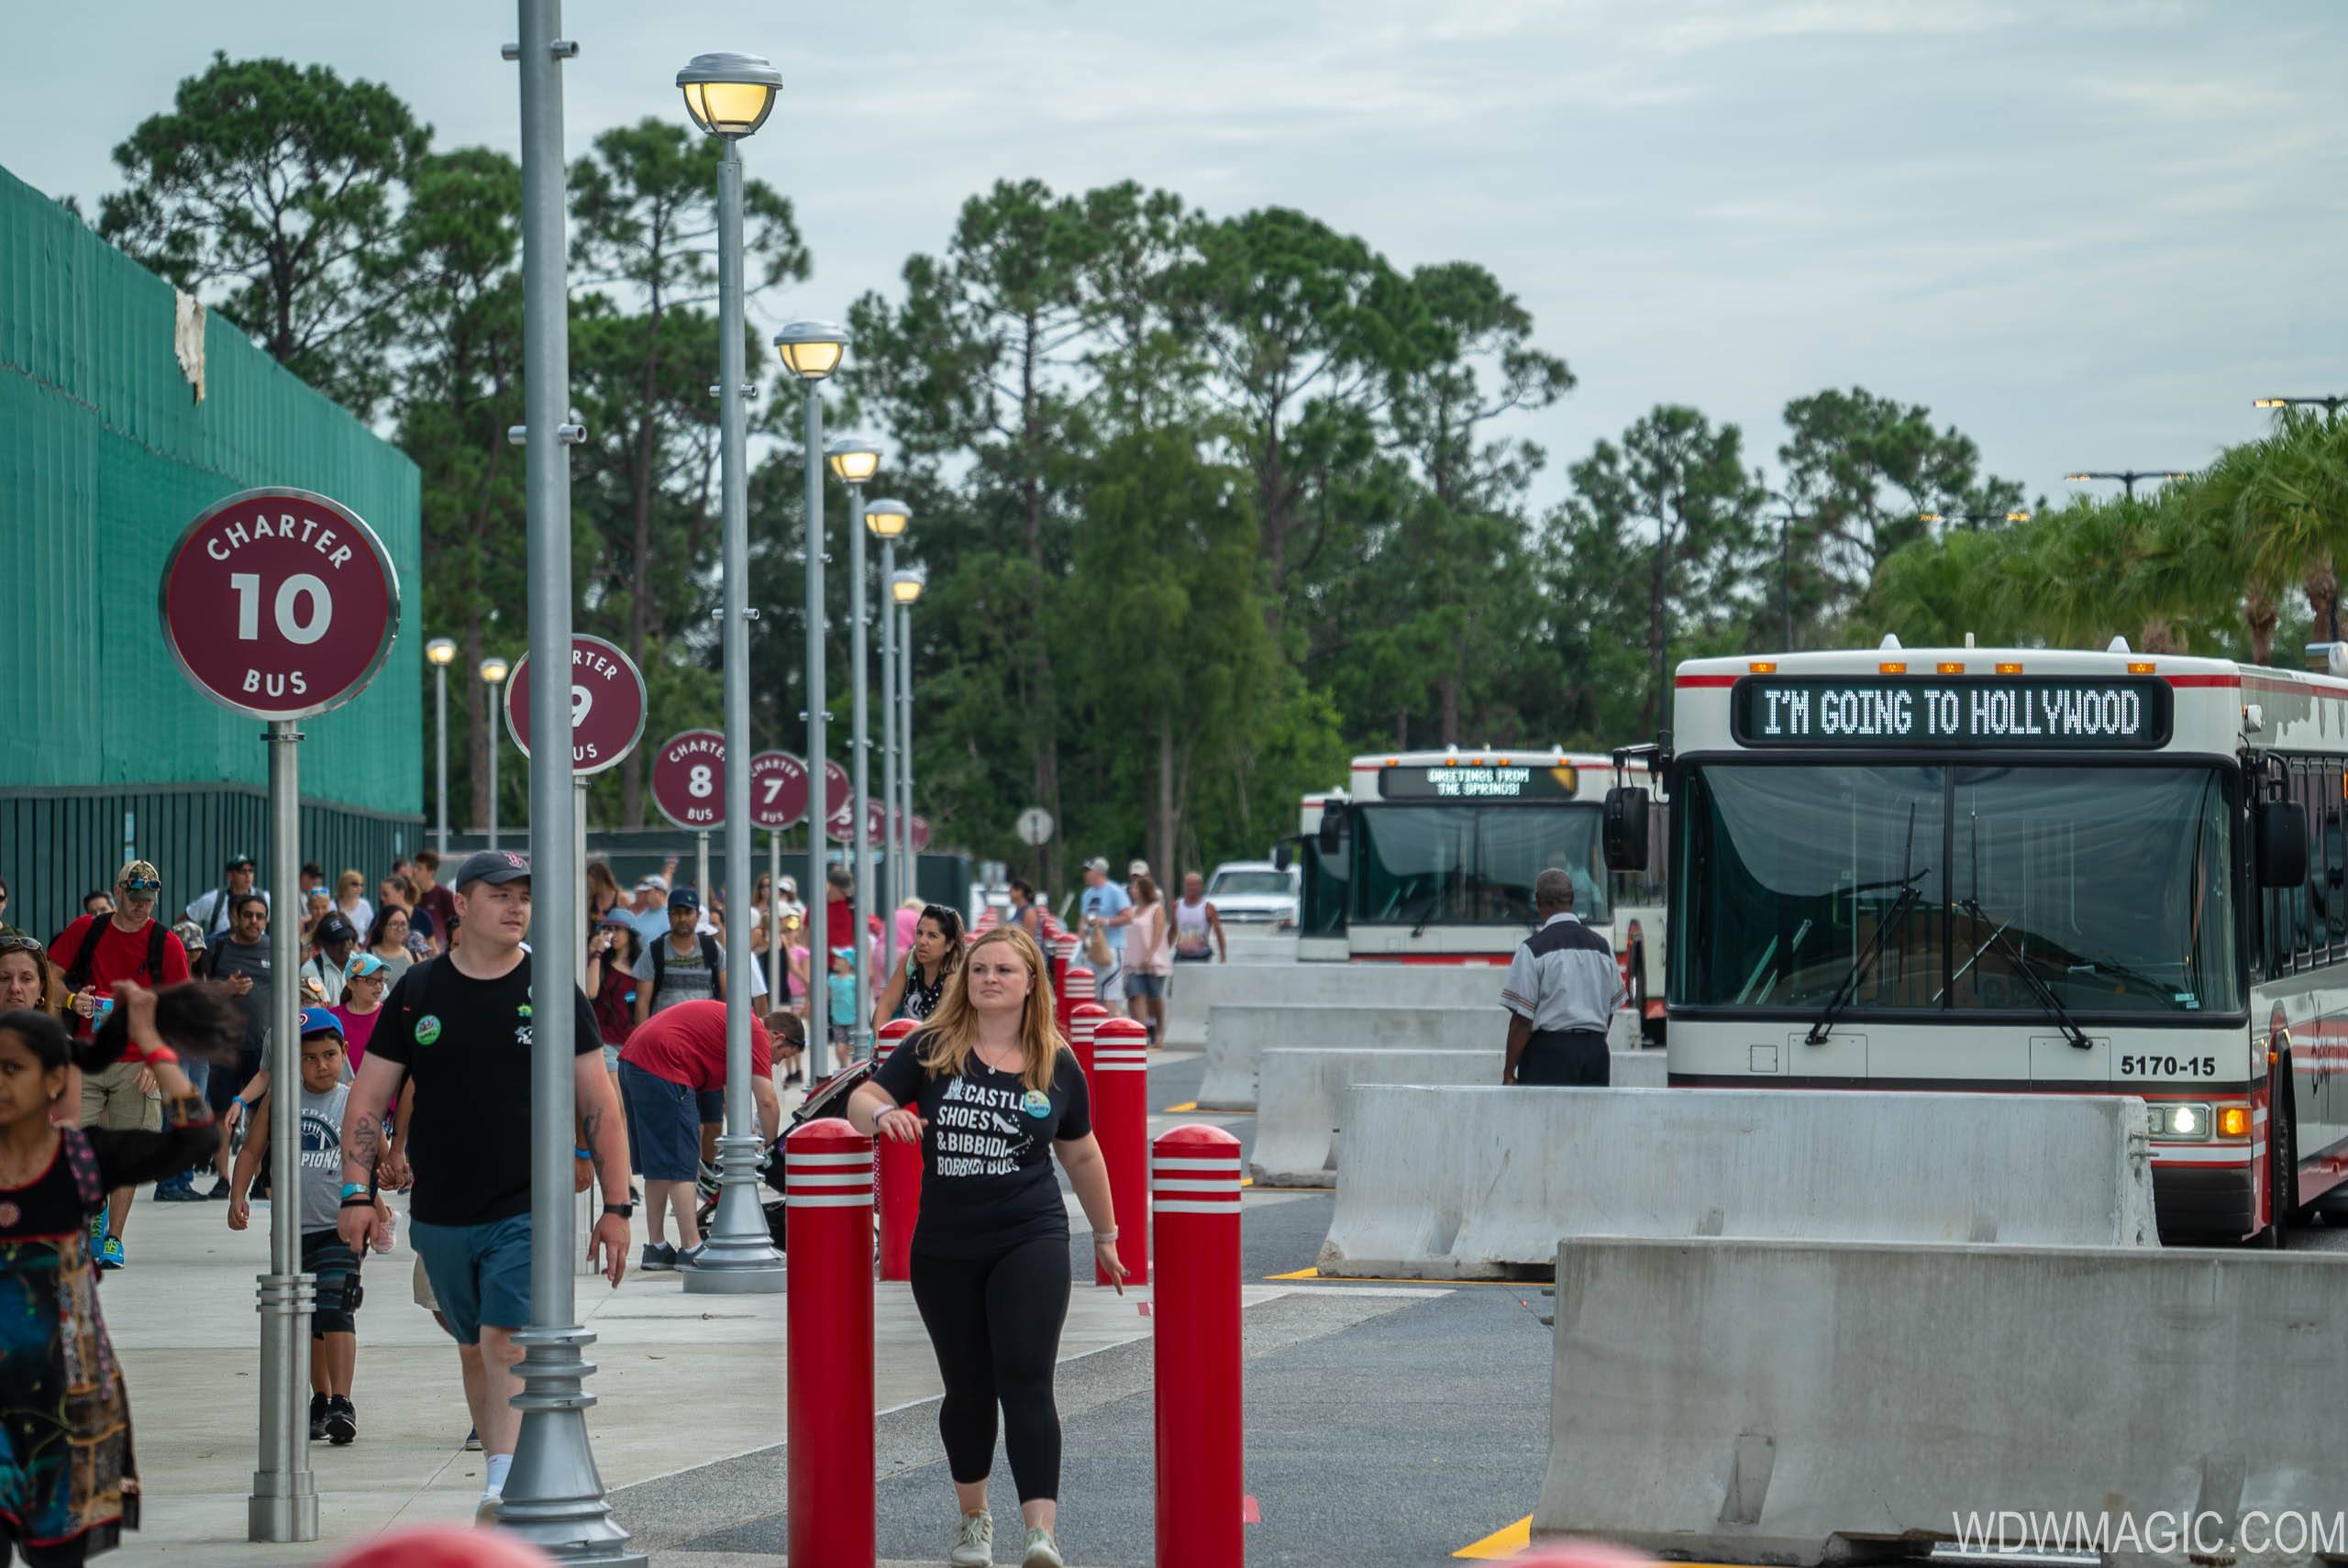  New Charter Bus stop area at Disney's Hollywood Studios